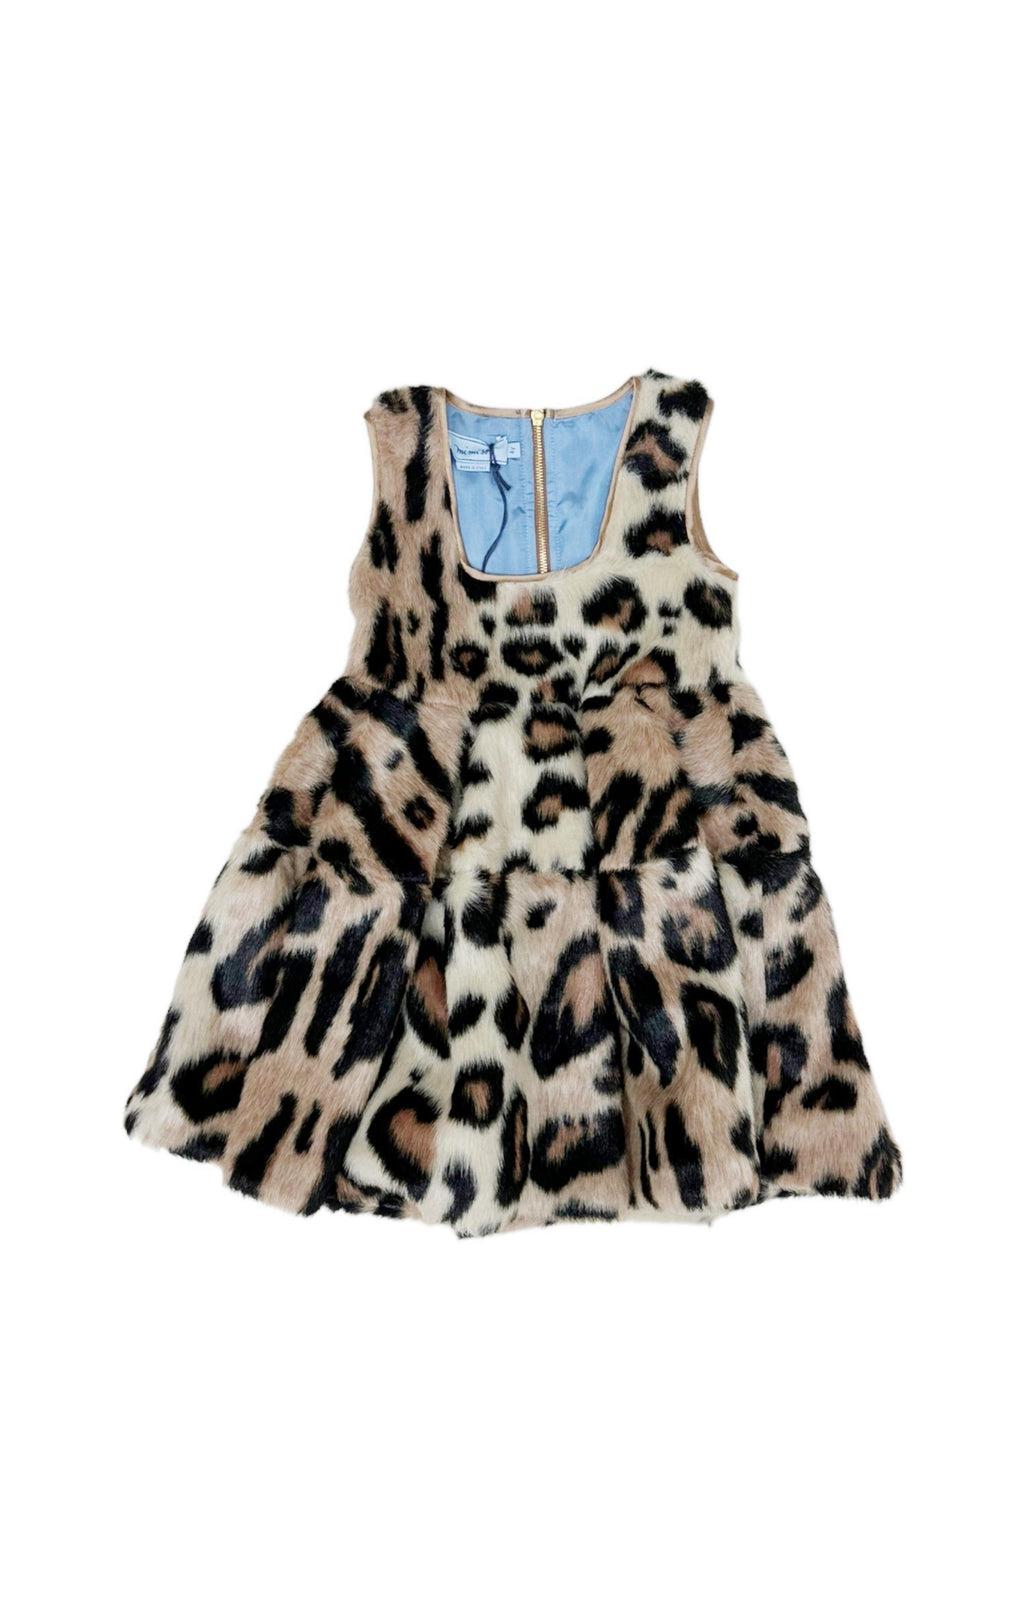 MIMISOL (NEW) with tags Dress Size: 4 Years